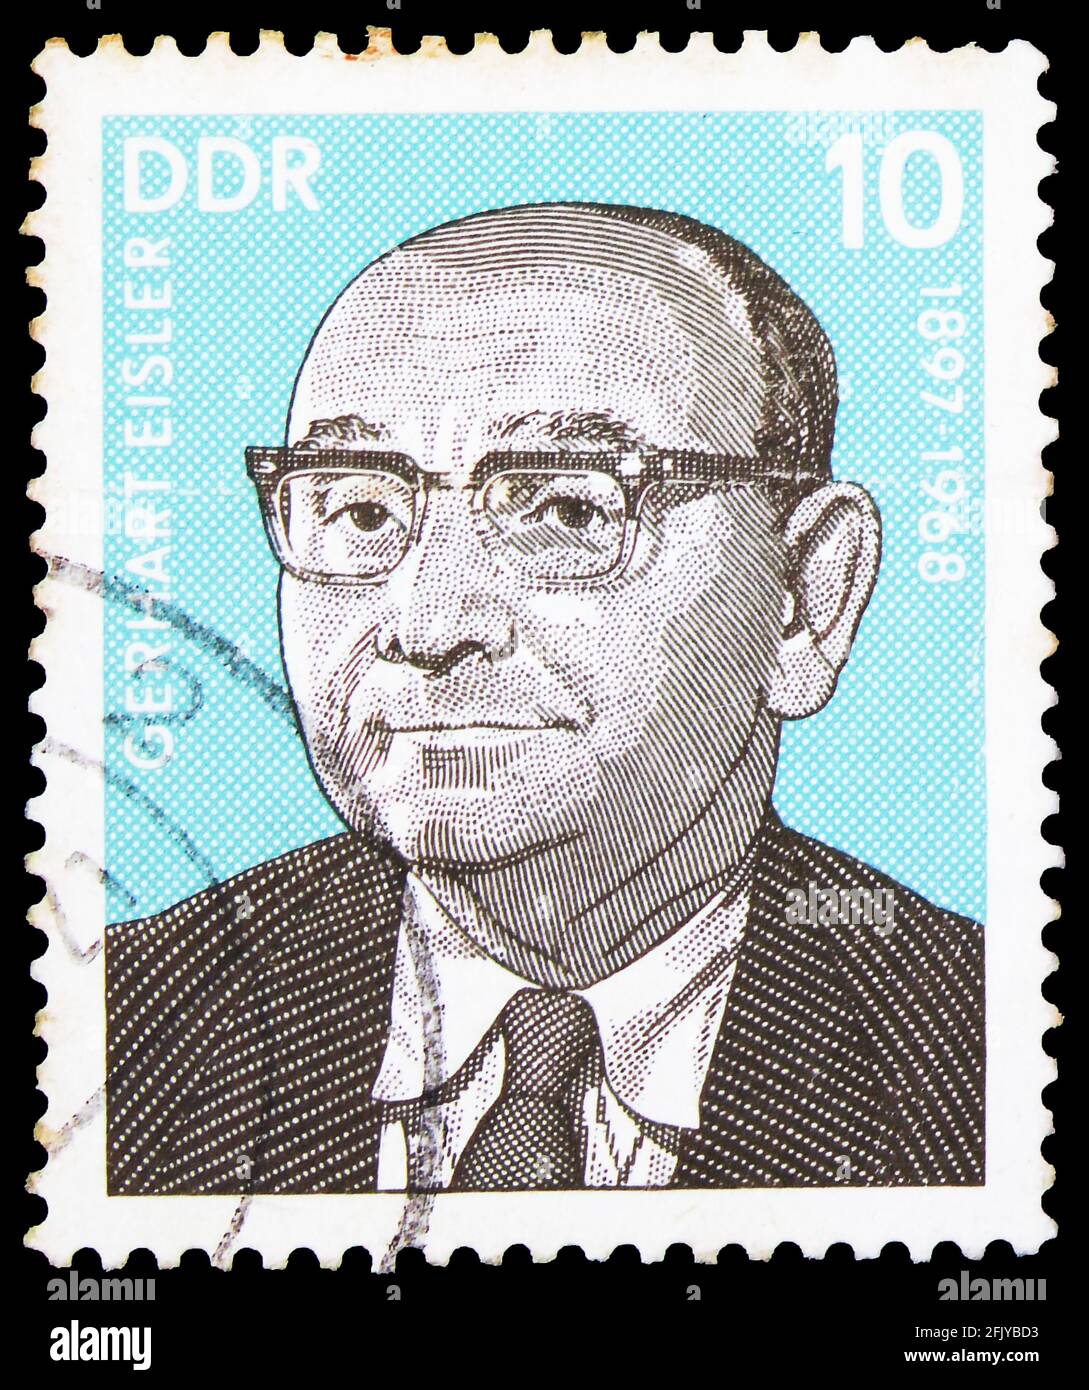 MOSCOW, RUSSIA - SEPTEMBER 27, 2019: Postage stamp printed in Germany, Democratic Republic, shows Gerhard Eisler, 10 Pf. - East German pfennig, Person Stock Photo